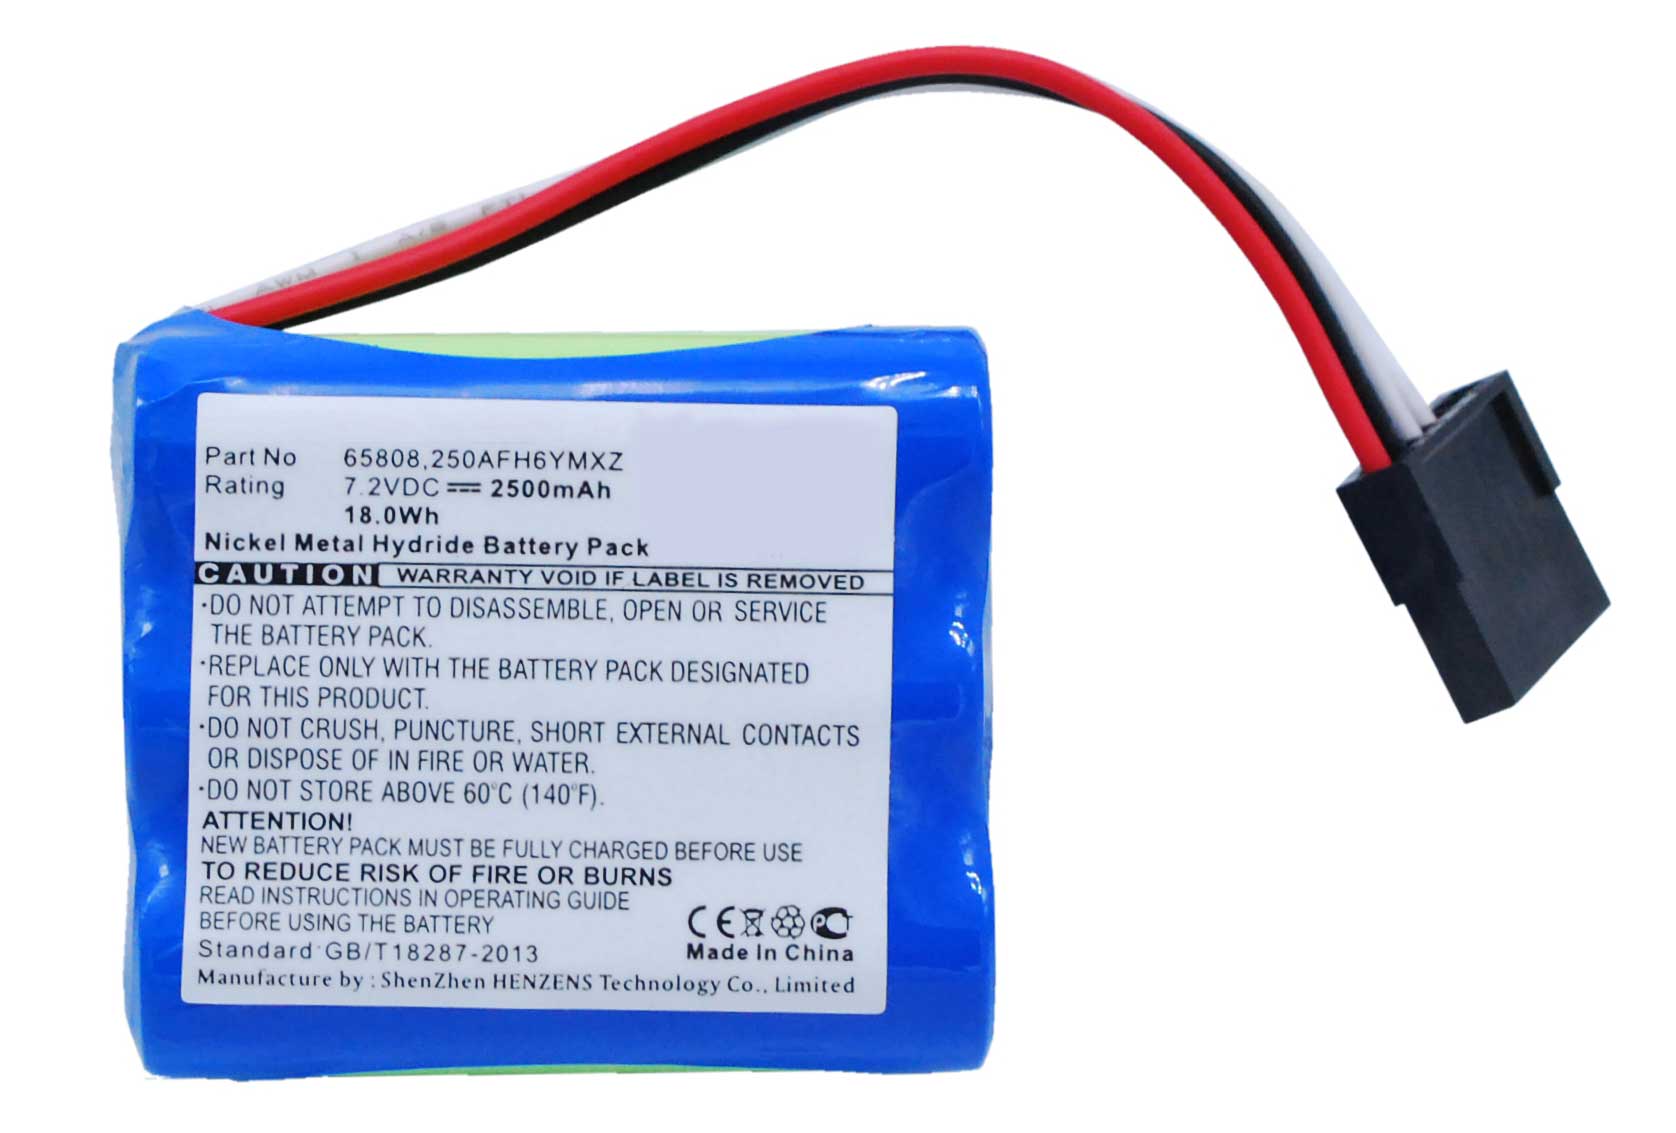 Synergy Digital Battery Compatible With Keeler Headlamp 65808 Replacement Battery - (Ni-MH, 7.2V, 2500 mAh)